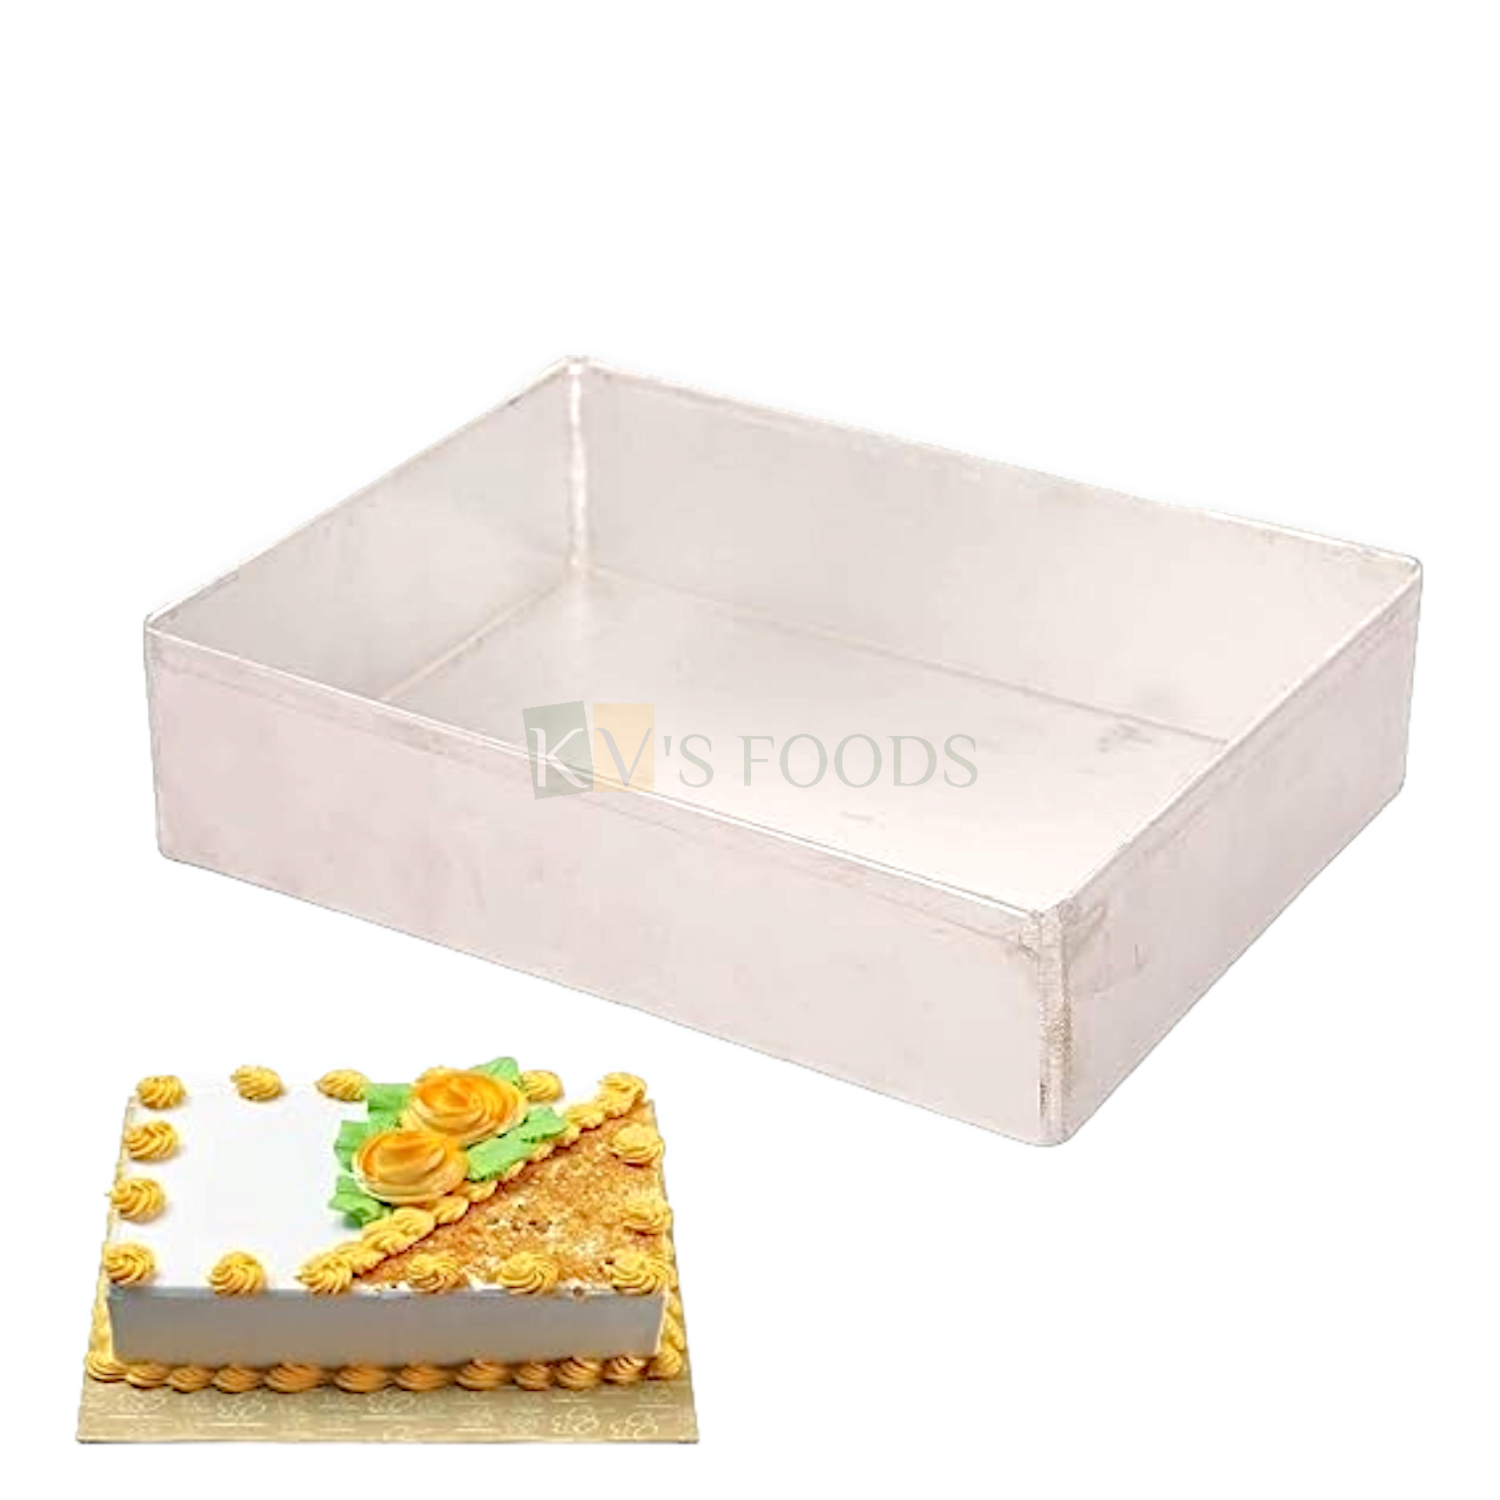 1PC Size 10 x 8 x 2 Inch Capacity ~1 to 1.5 Kg Aluminium Baking Pan Silver Rectangle Big Loaf Bread Mould Bakeware Mousse Pudding Cheese Fruit Chocolate Cakes Containers Mold Tins Tray for Ovens